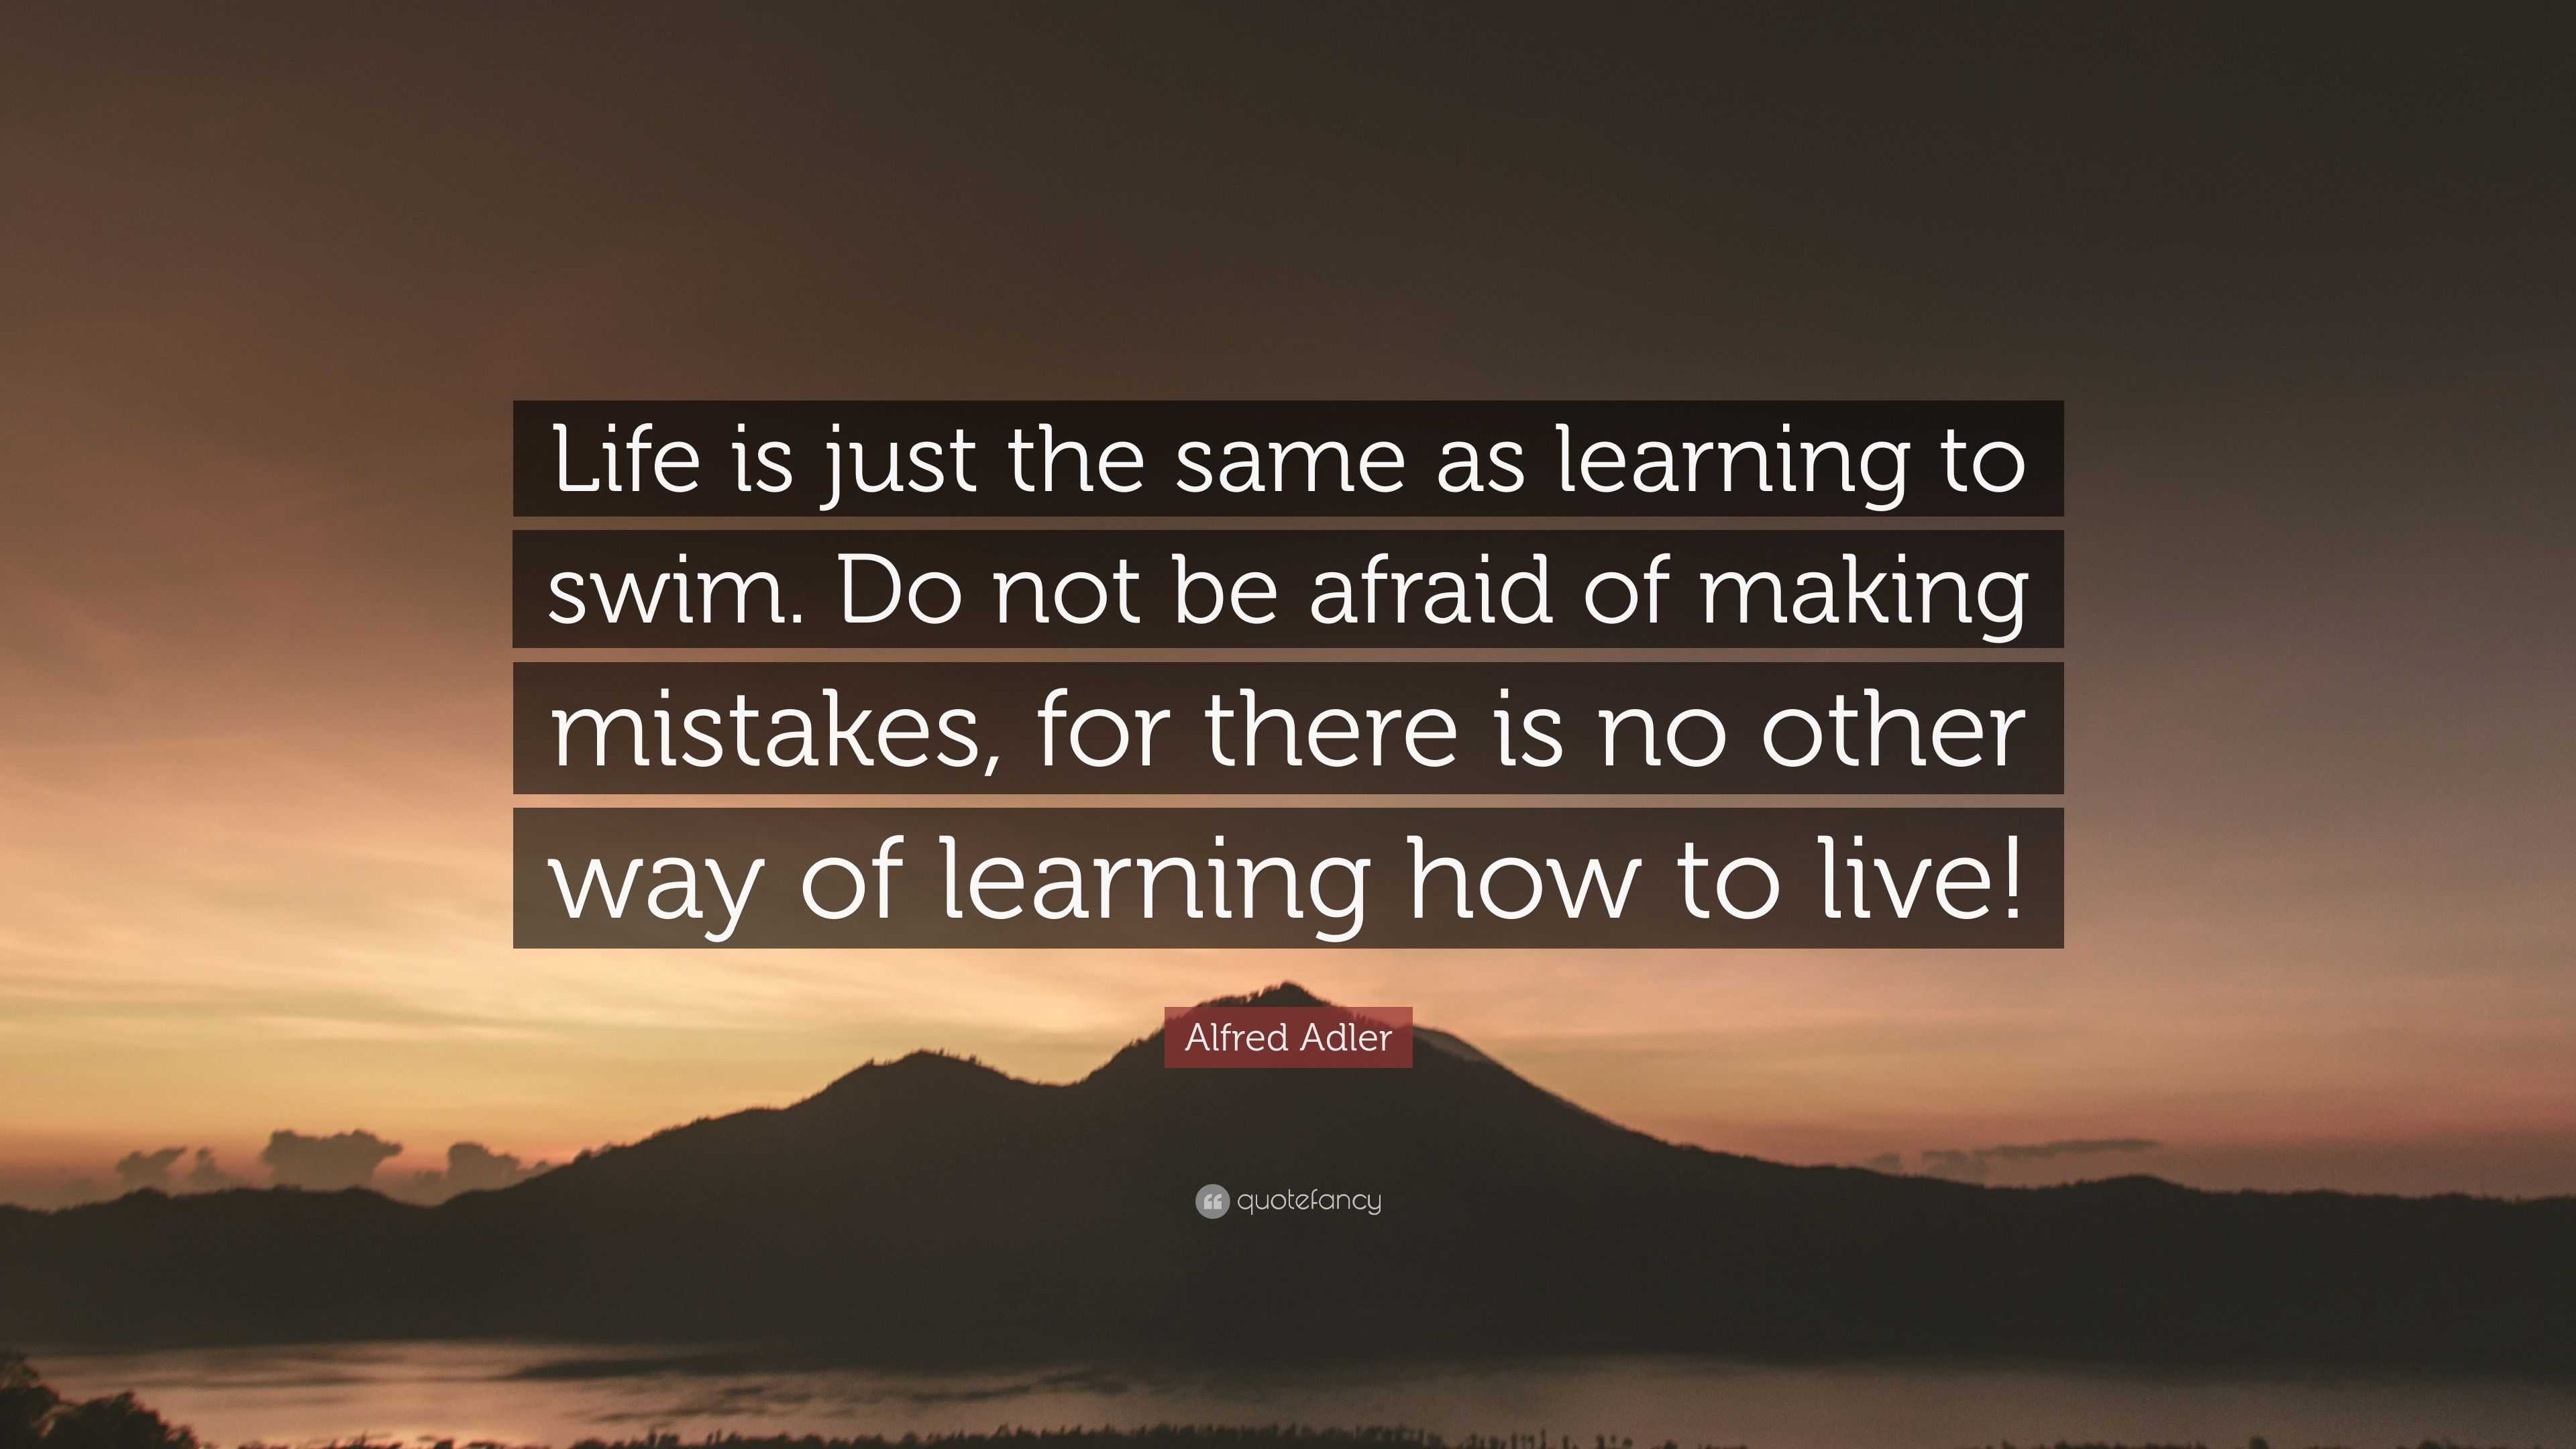 Alfred Adler Quote: “Life is just the same as learning to swim. Do not